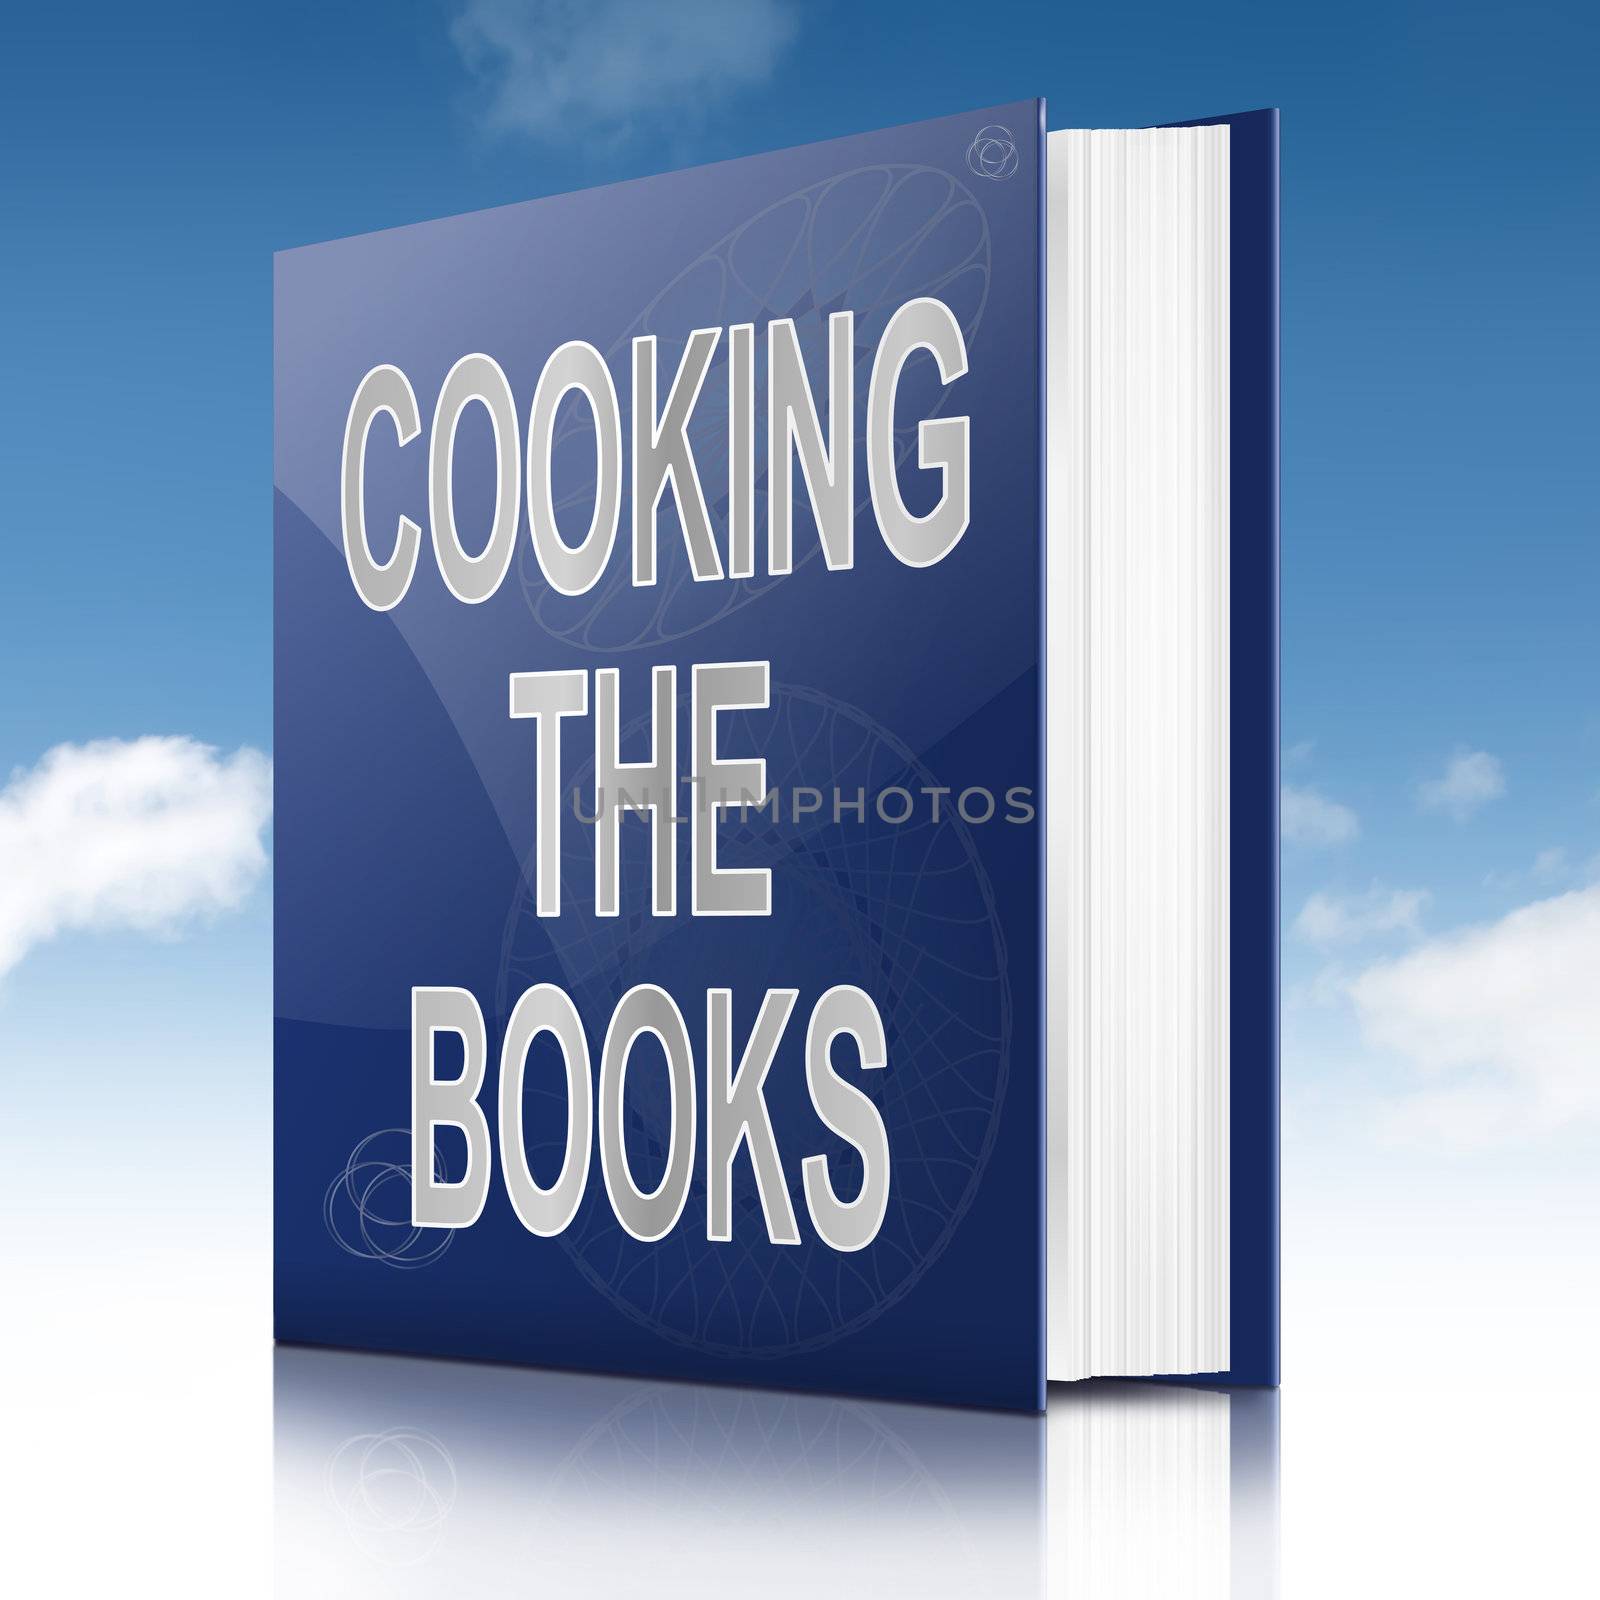 Cooking the books concept. by 72soul